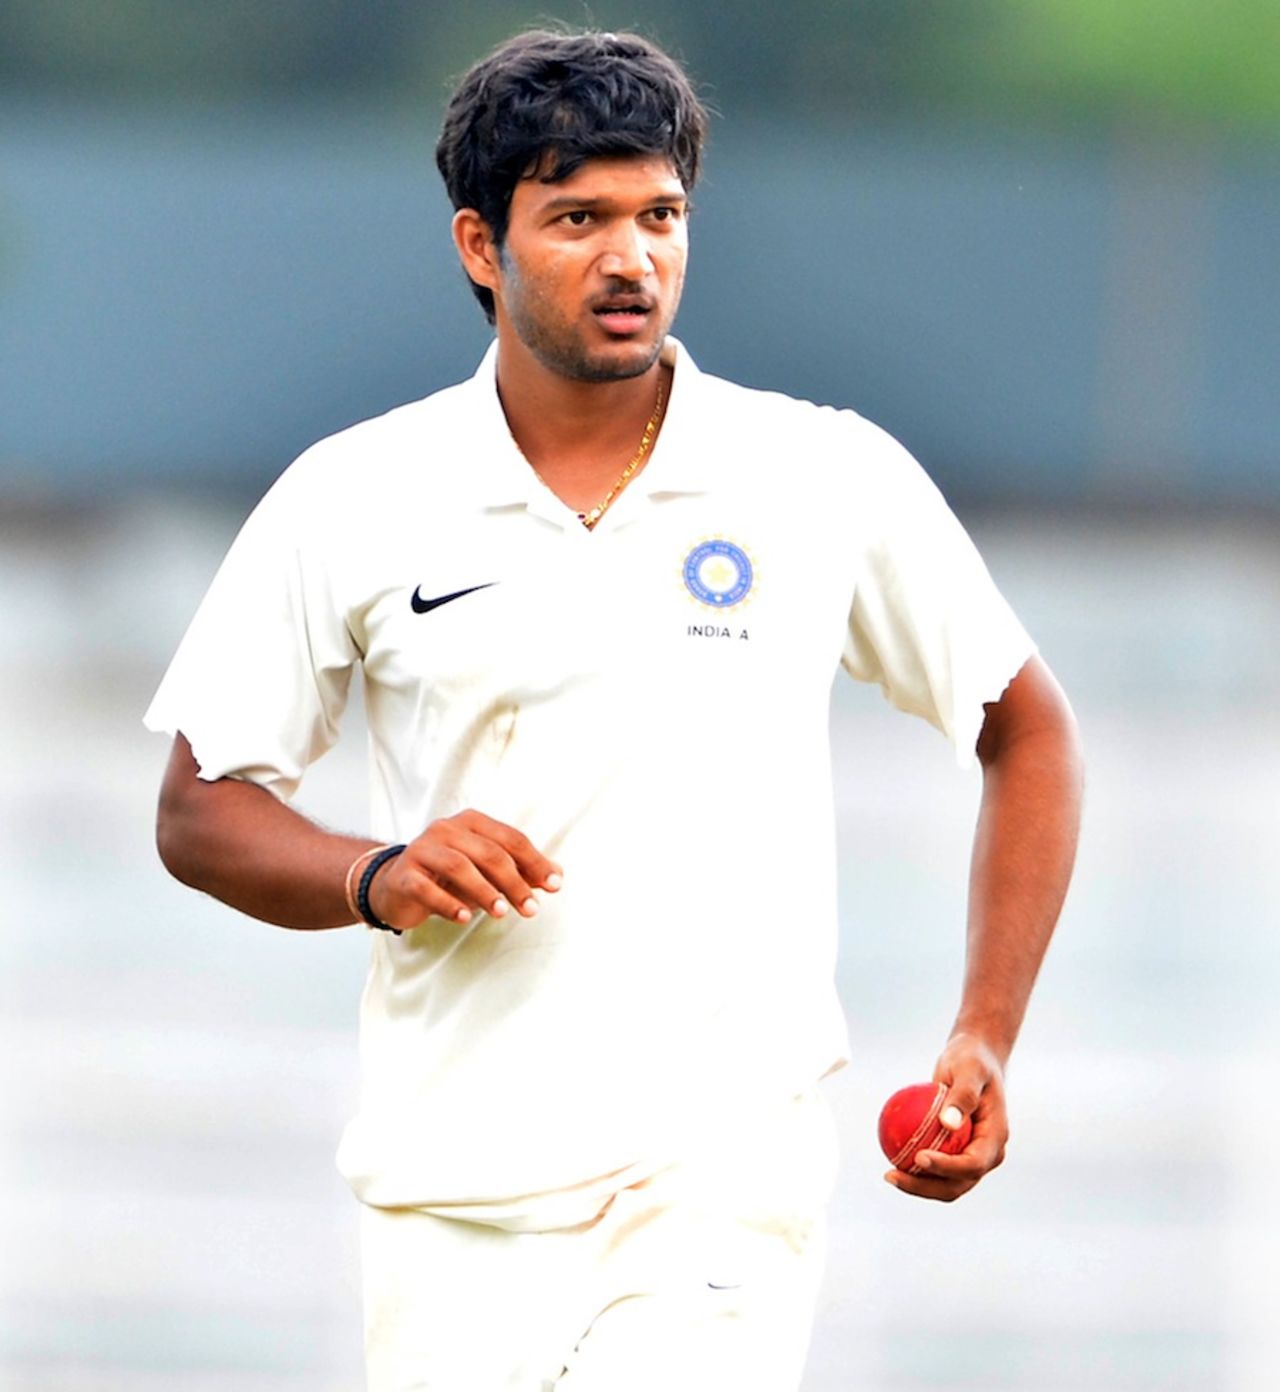 Jalaj Saxena took six wickets in the innings, India A v New Zealand A, 1st unofficial Test, day 2, Visakhapatnam, August 29, 2013